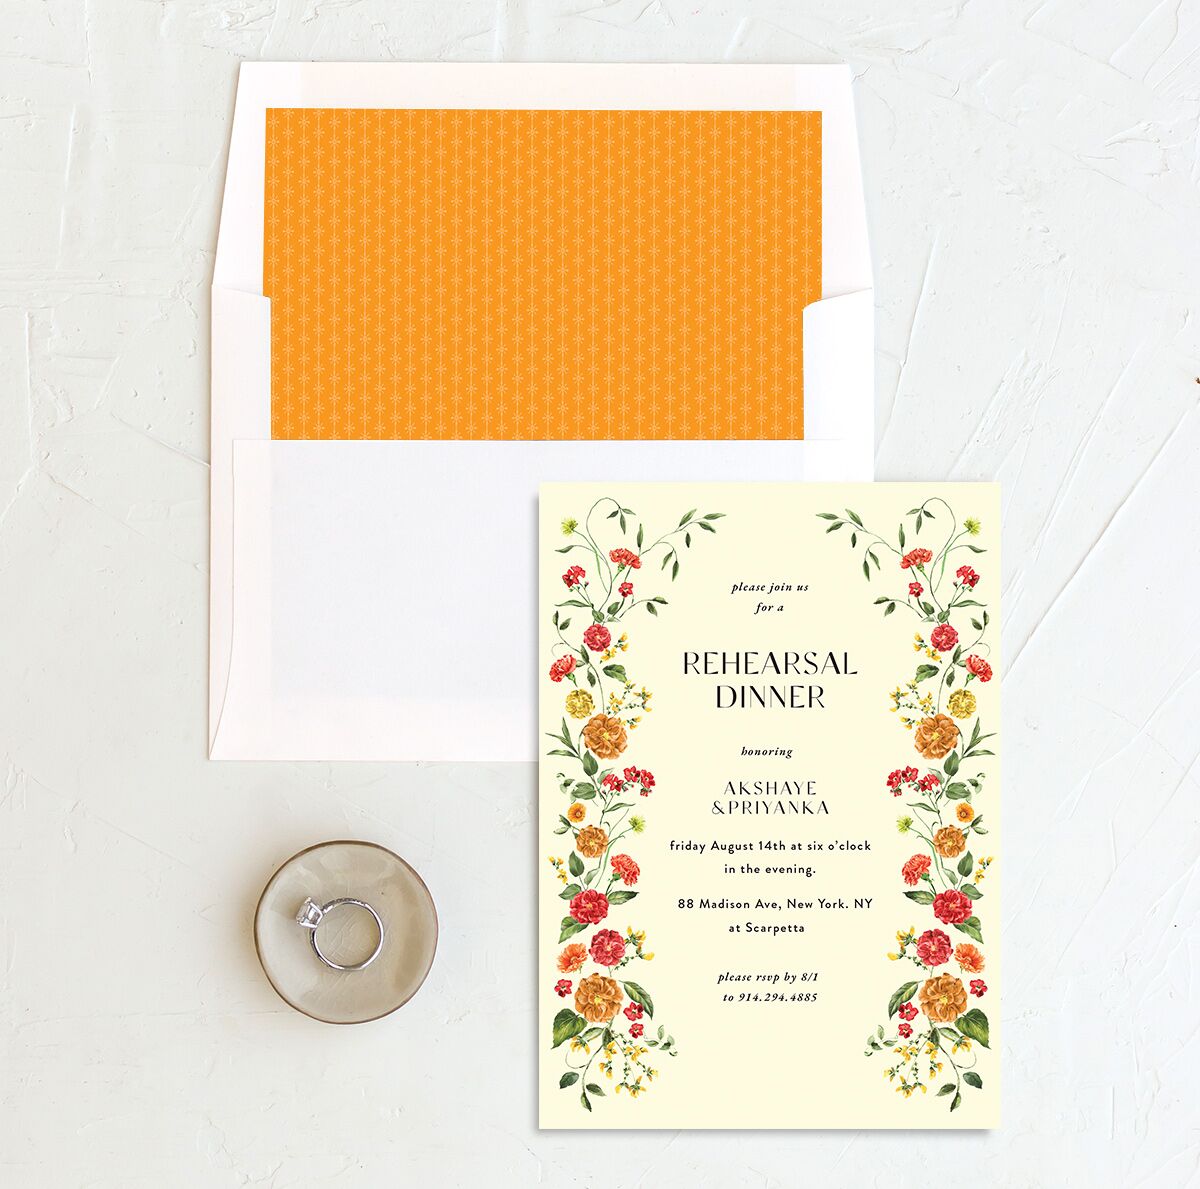 Ascending Garland Rehearsal Dinner Invitations envelope-and-liner in yellow